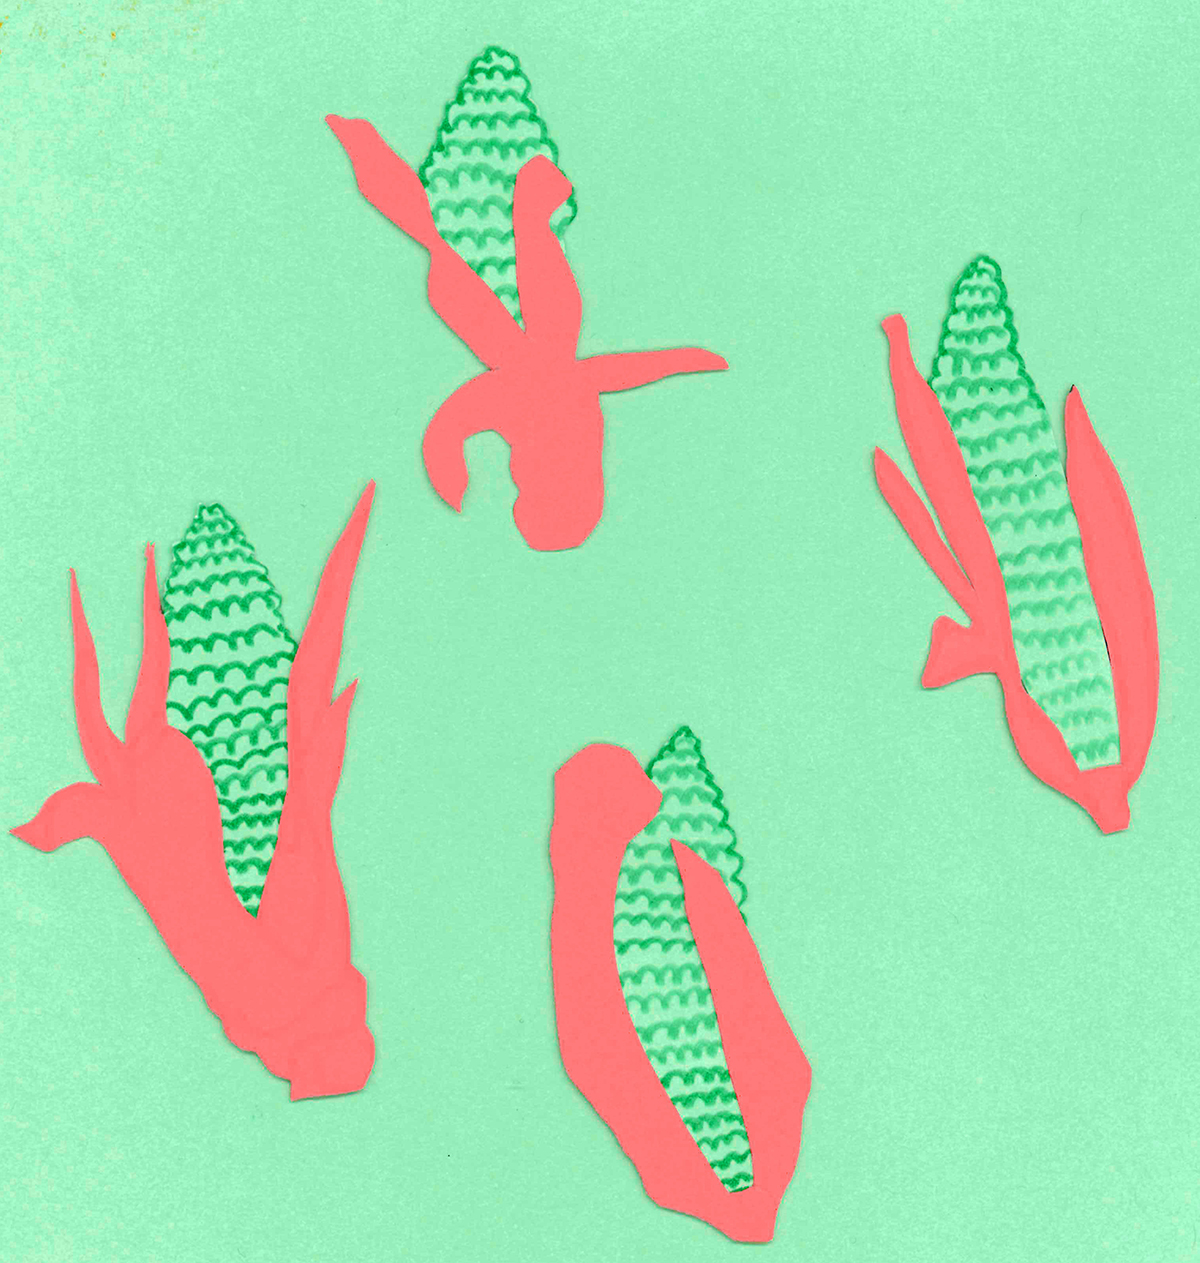 Colourful illustration of corn cobs against a pale green background